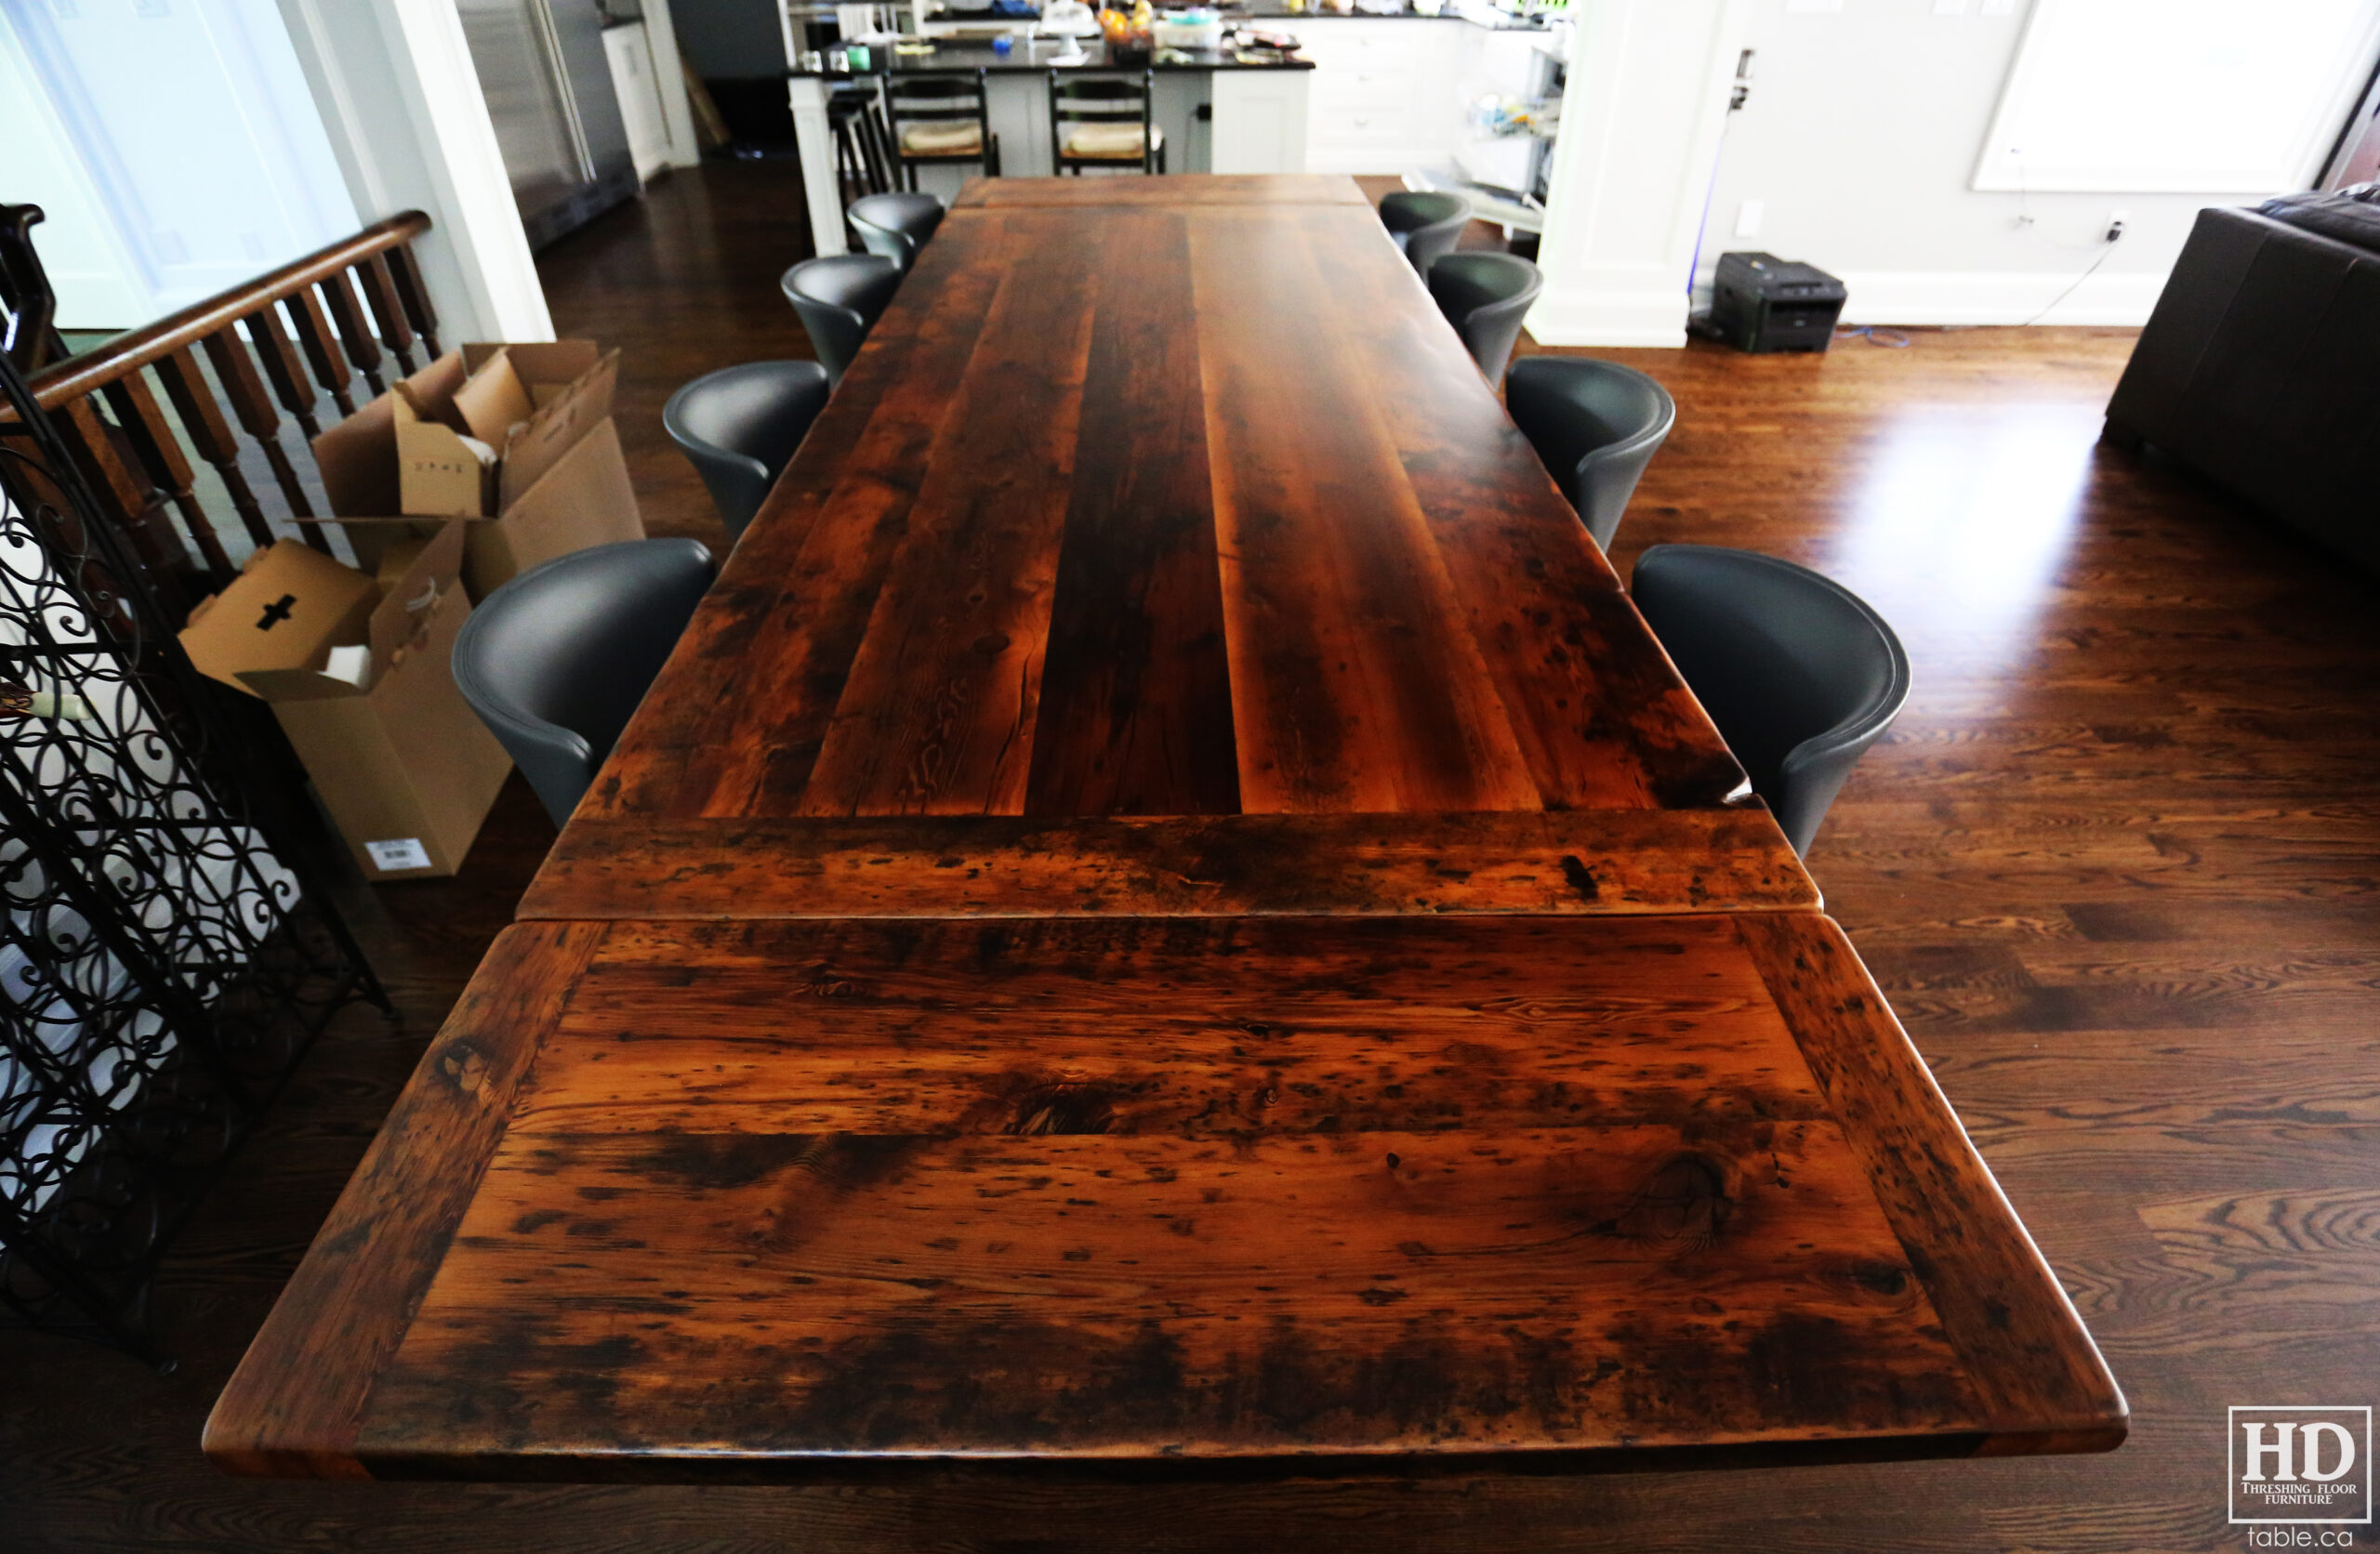 Extendable Reclaimed Wood Table made from Ontario Barnwood by HD Threshing Floor Furniture / www.table.ca